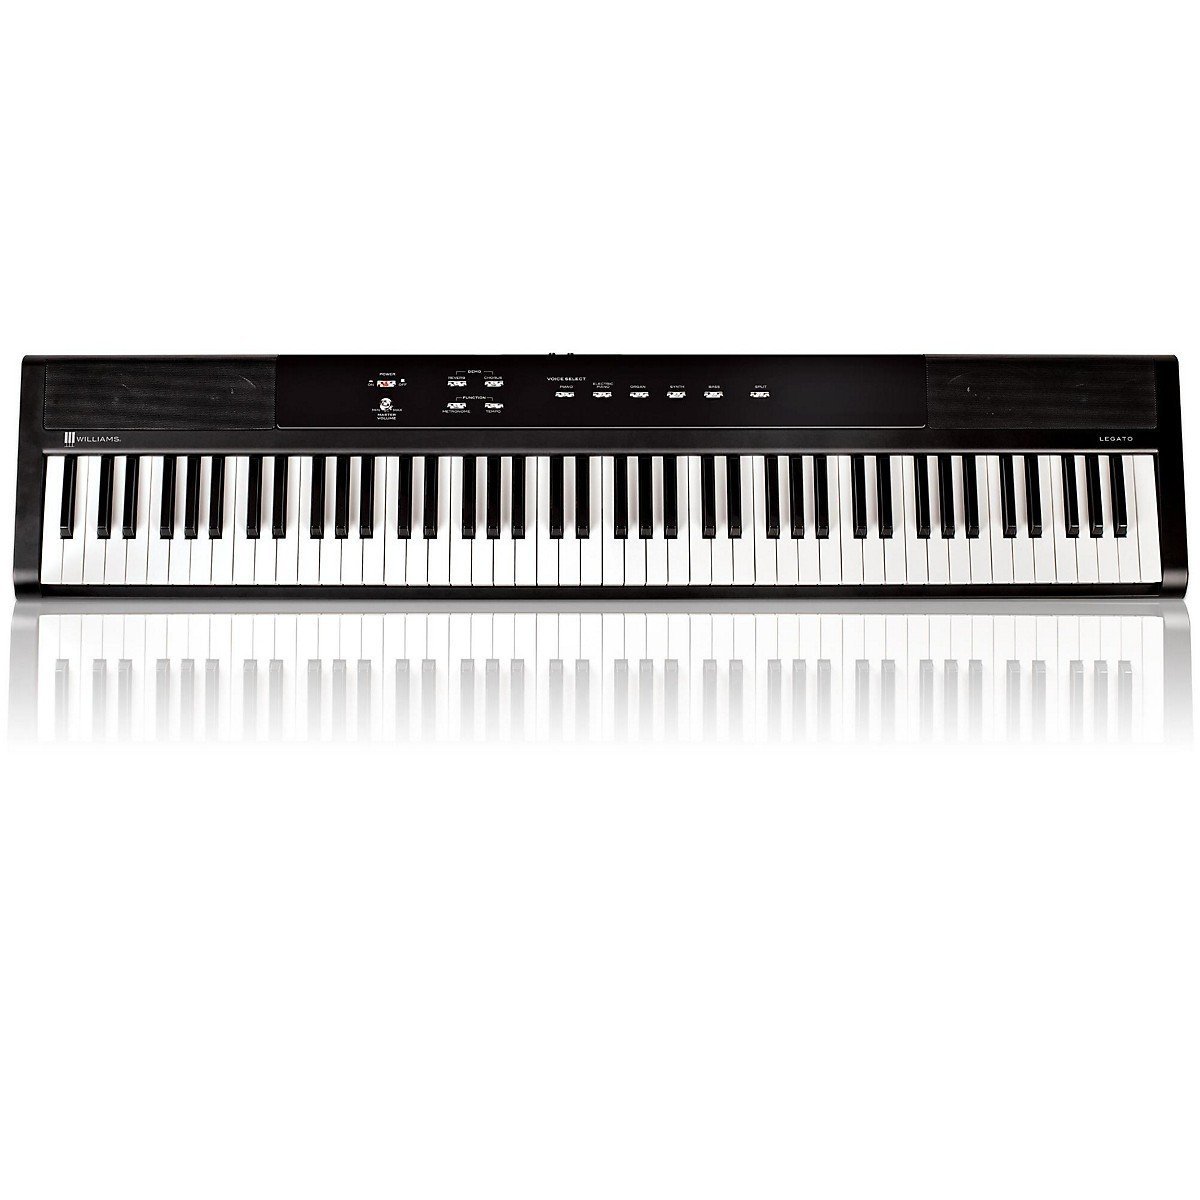 Buying An Affordable Digital Piano